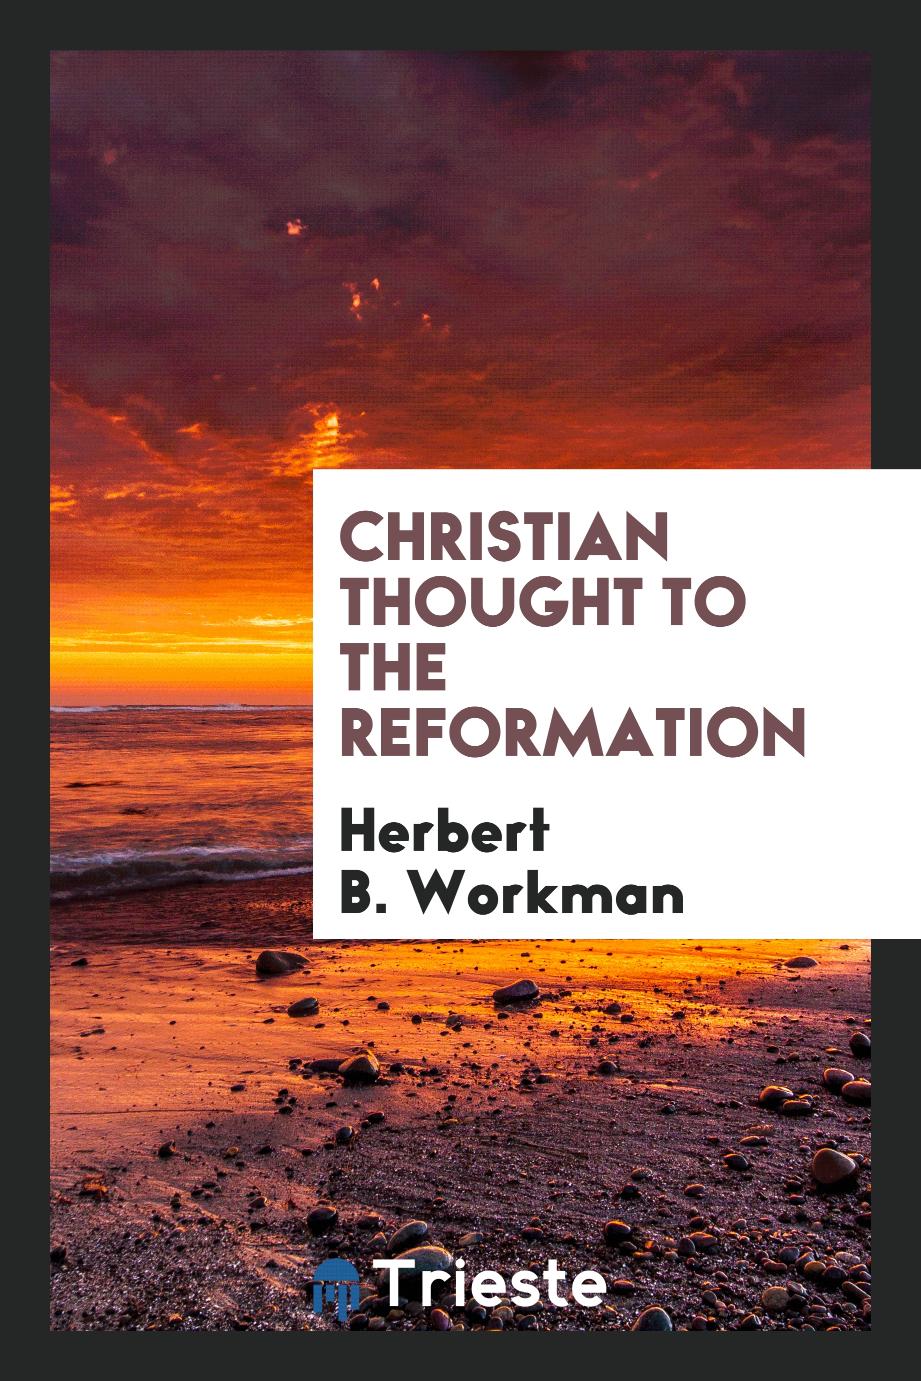 Christian thought to the Reformation